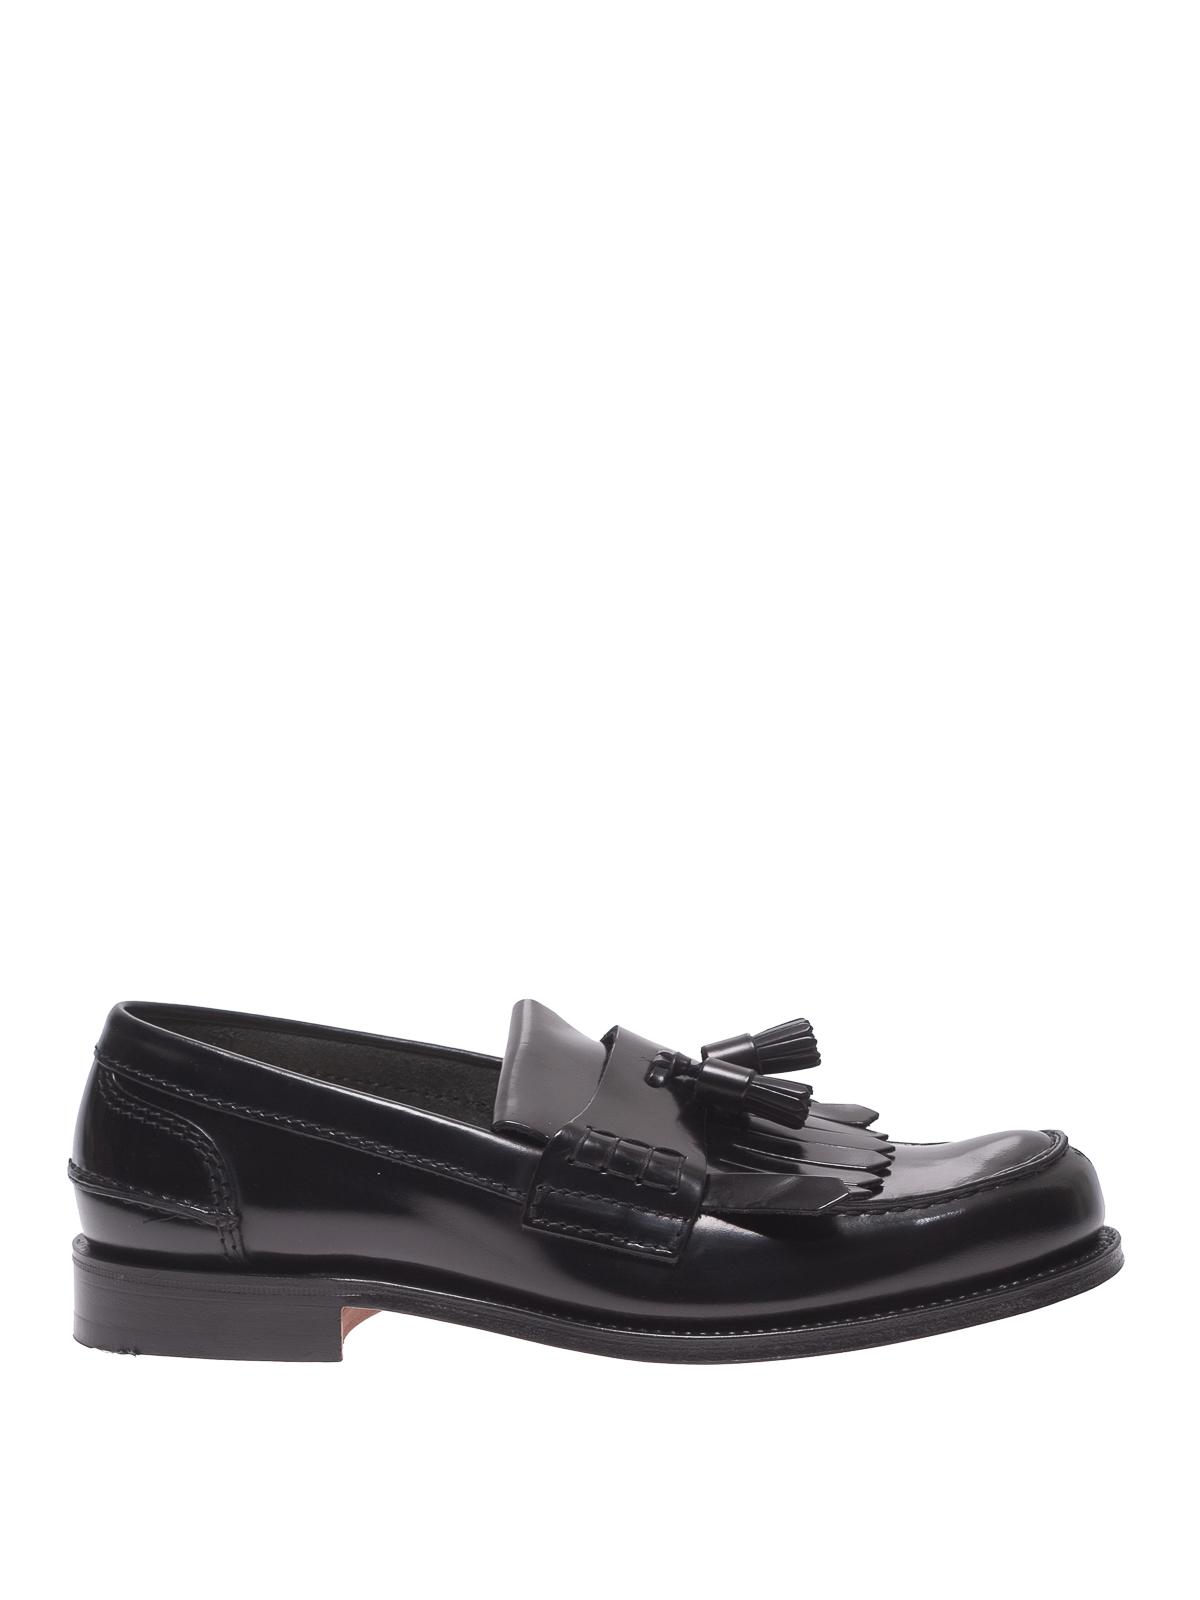 Church's Oreham Polished Leather Tasselled Loafers in Black - Lyst